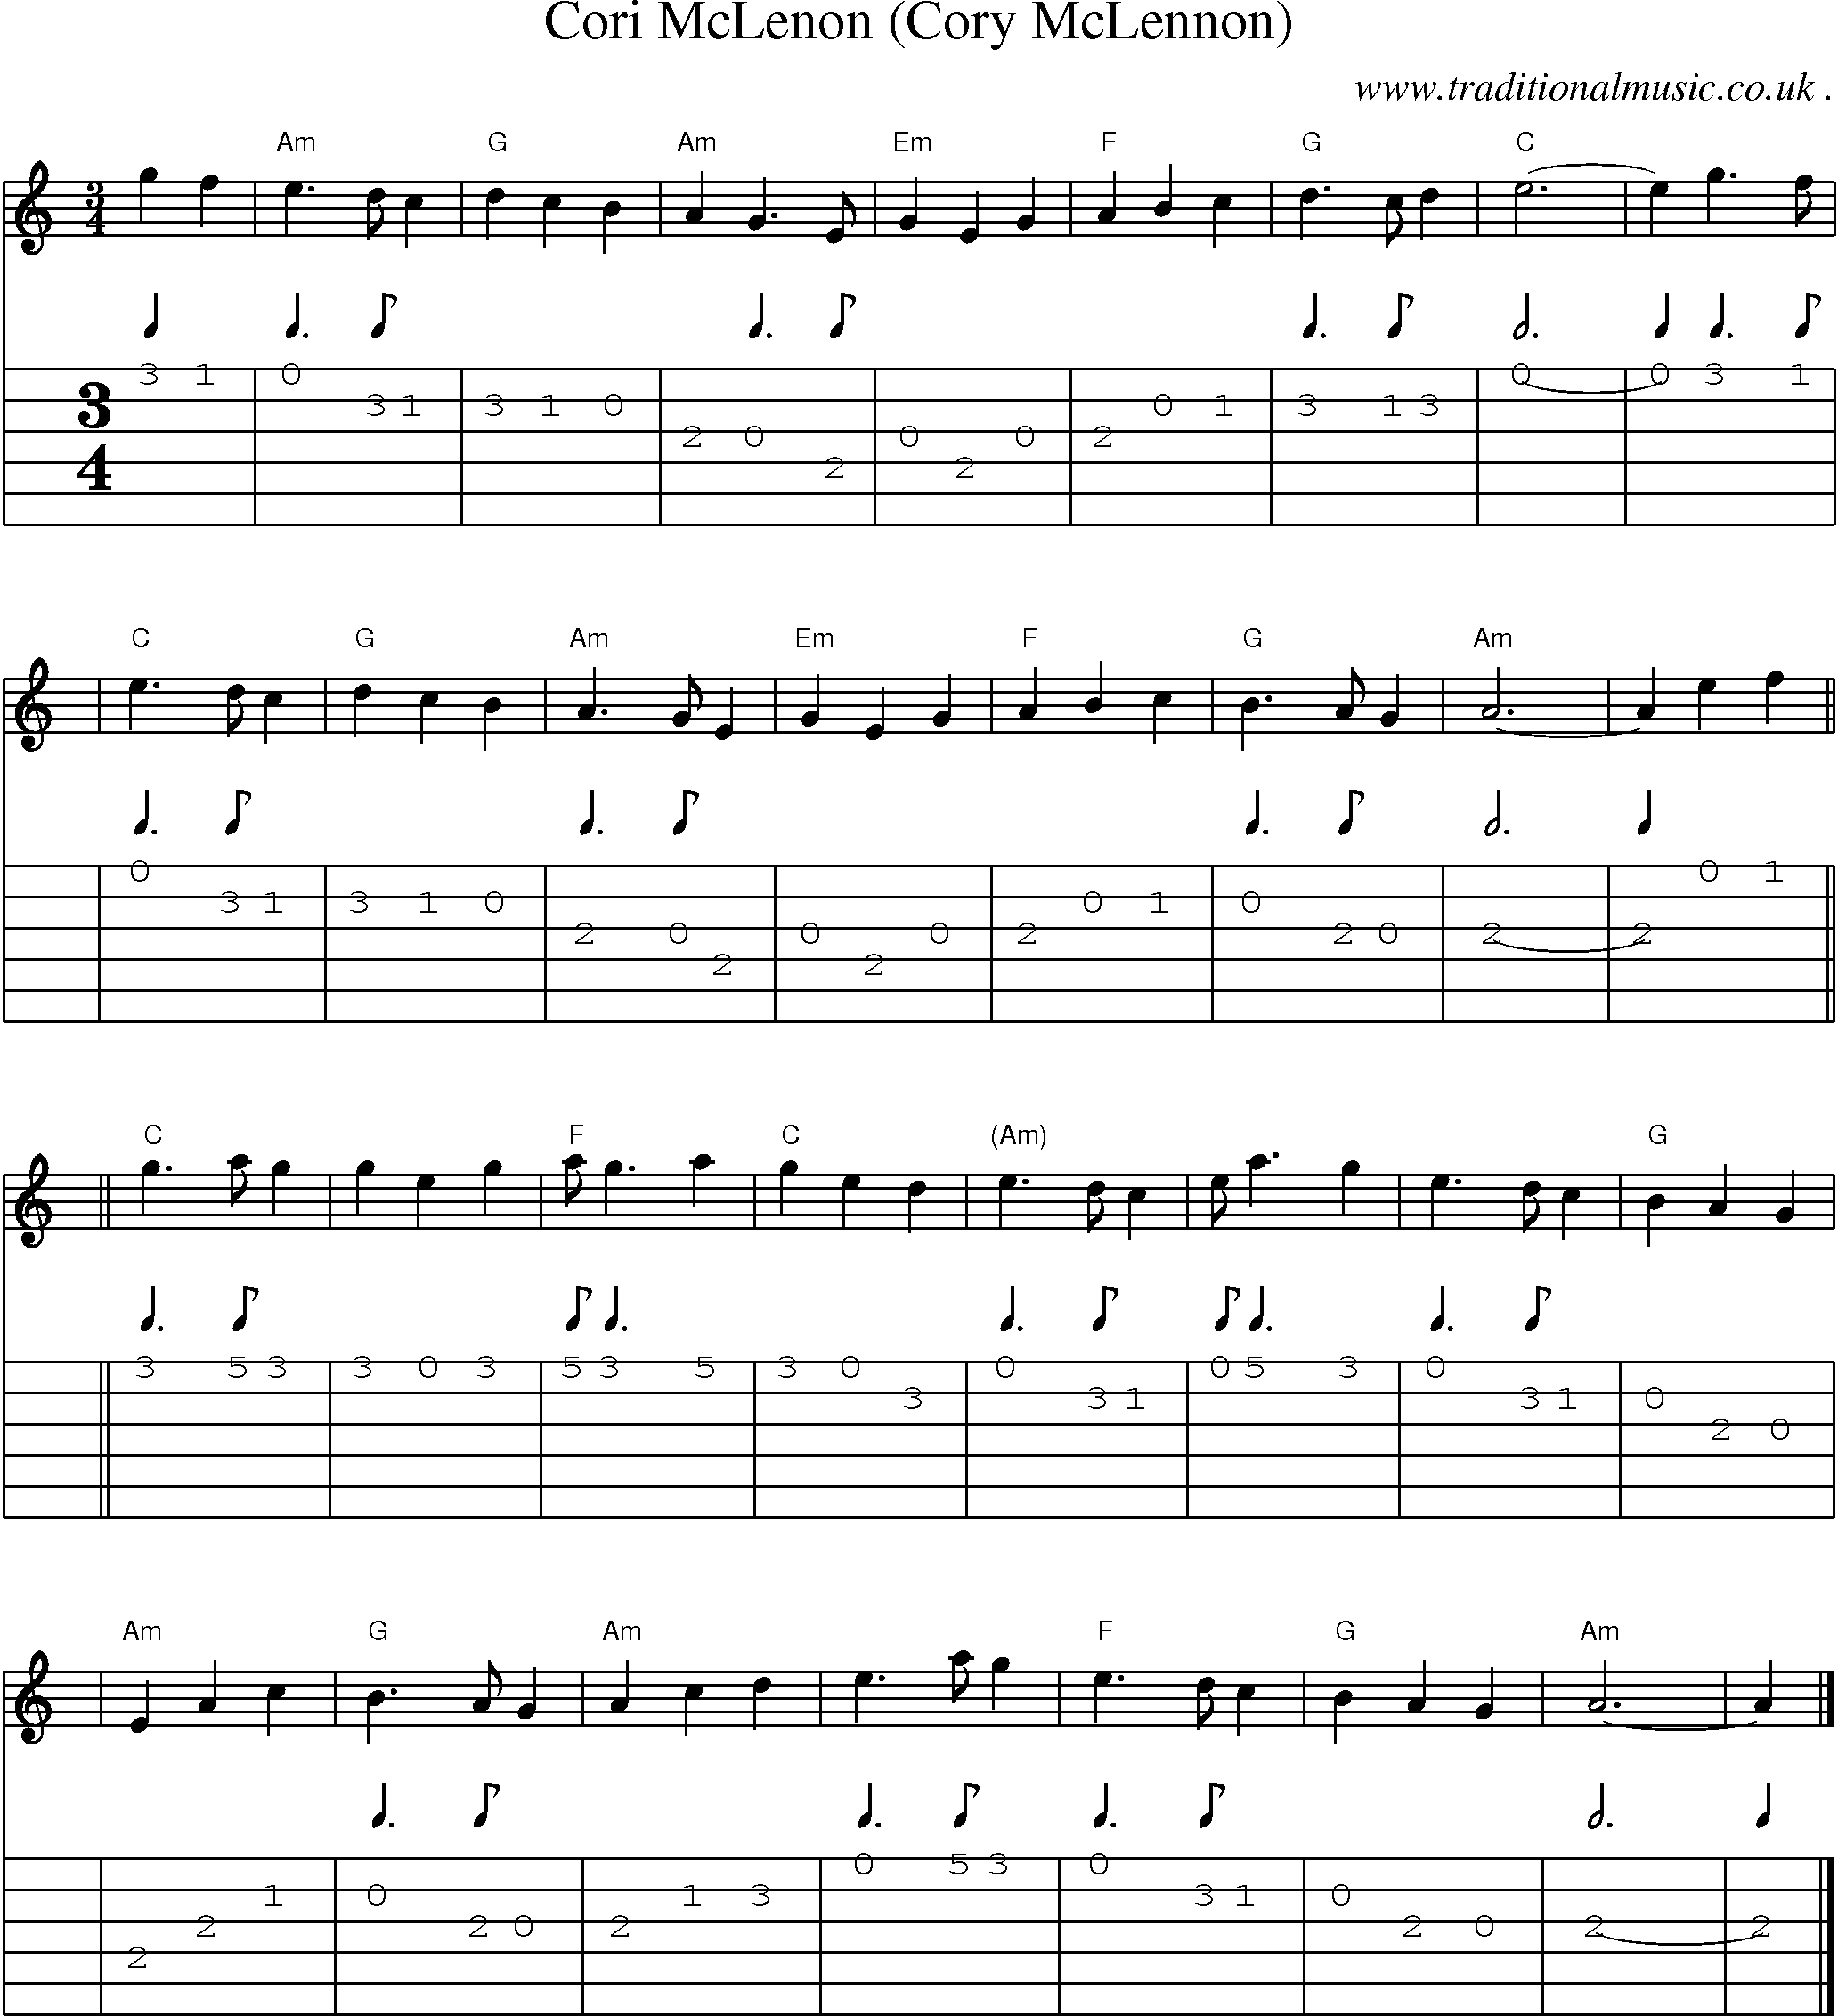 Sheet-music  score, Chords and Guitar Tabs for Cori Mclenon Cory Mclennon